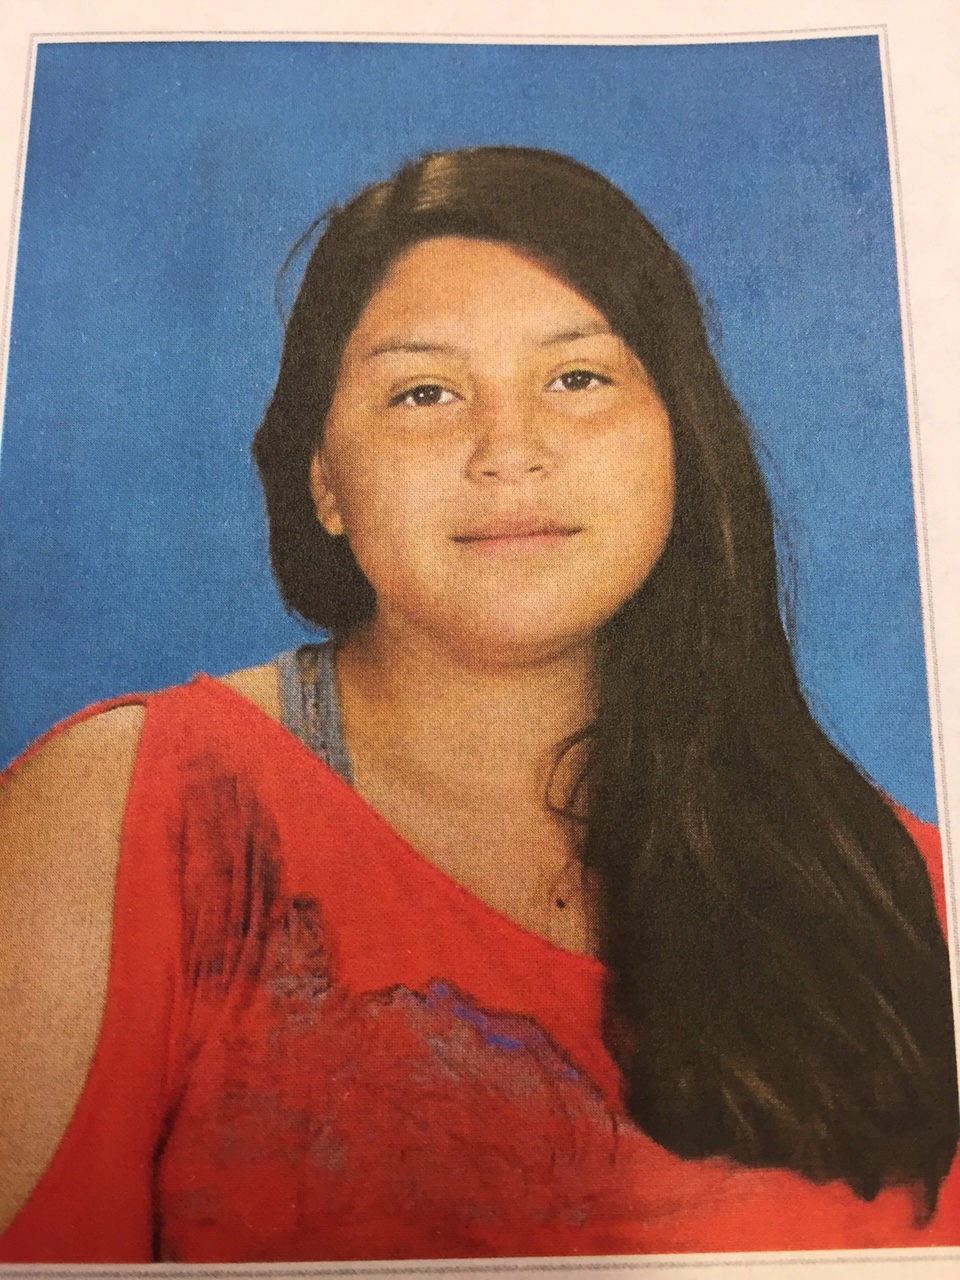 Of Missing Teen Photo On 112